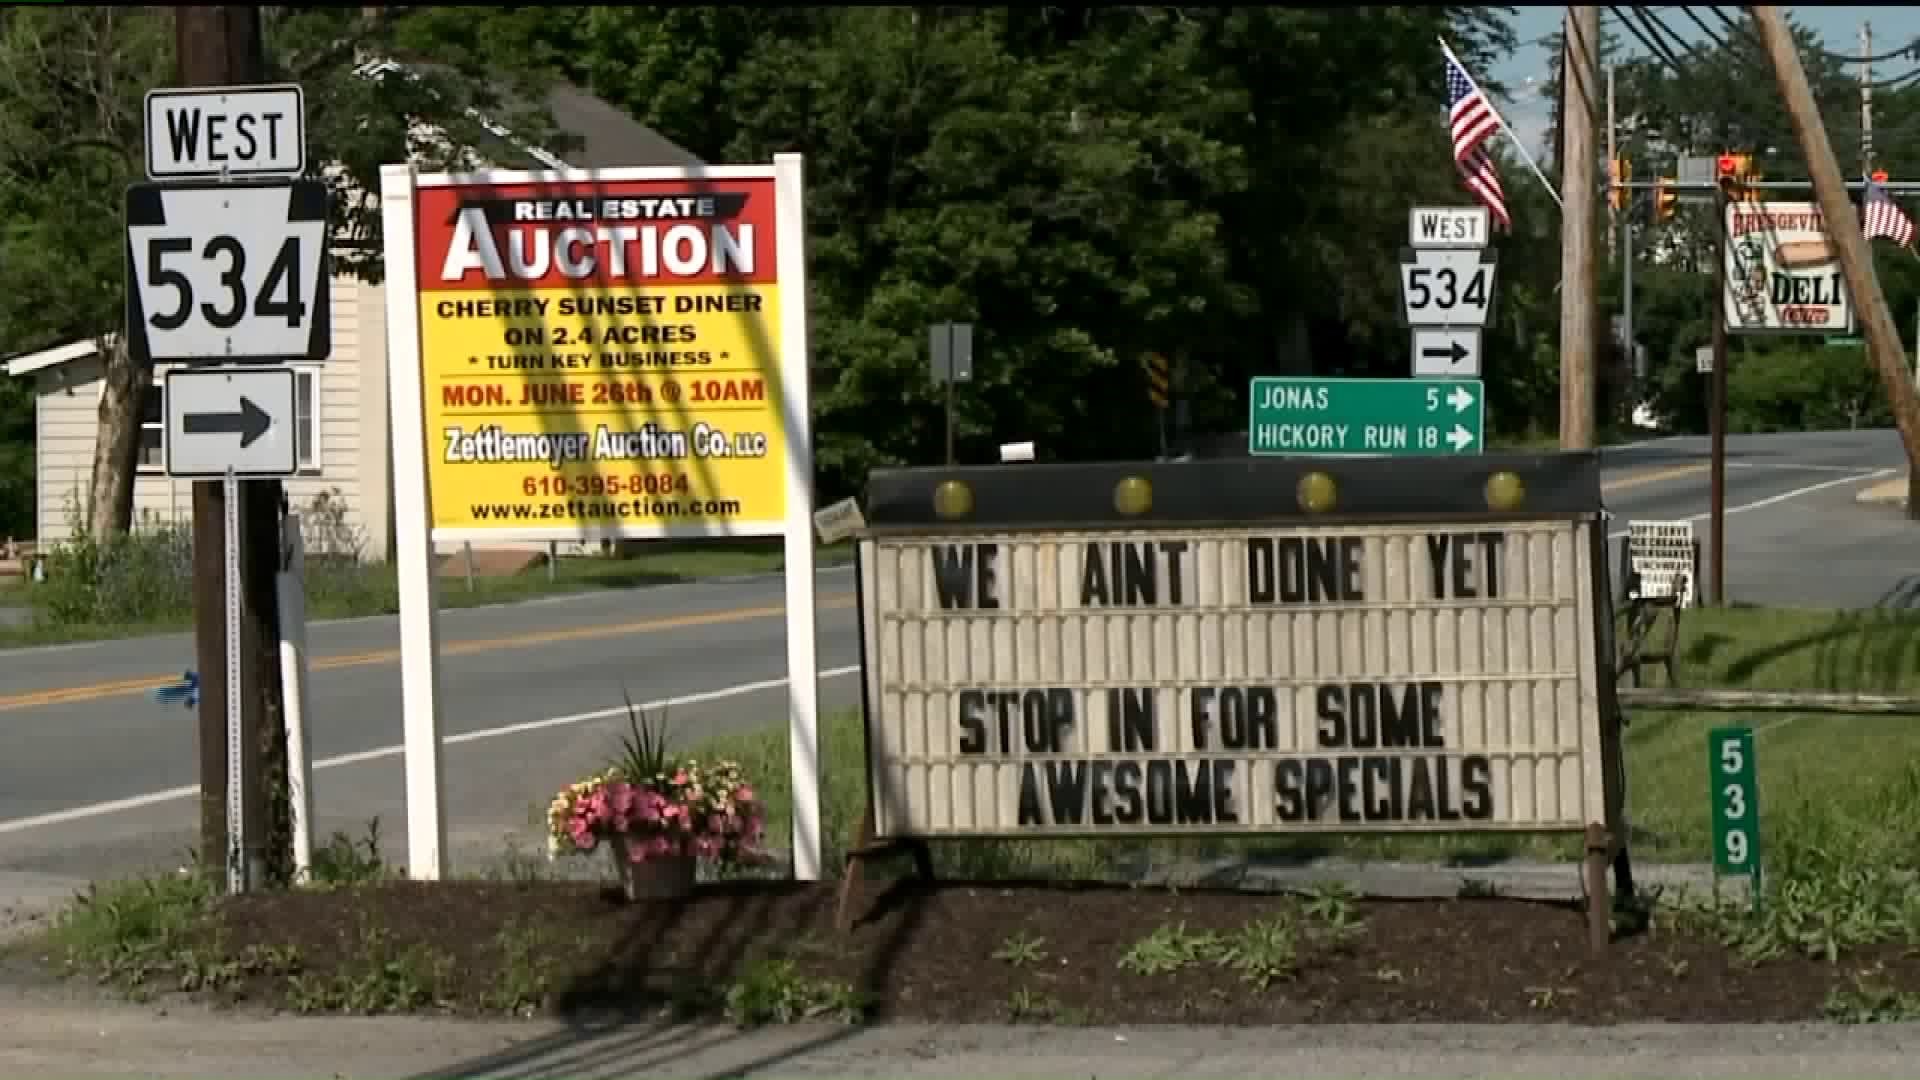 Family Puts Restaurant in the Poconos Up for Auction